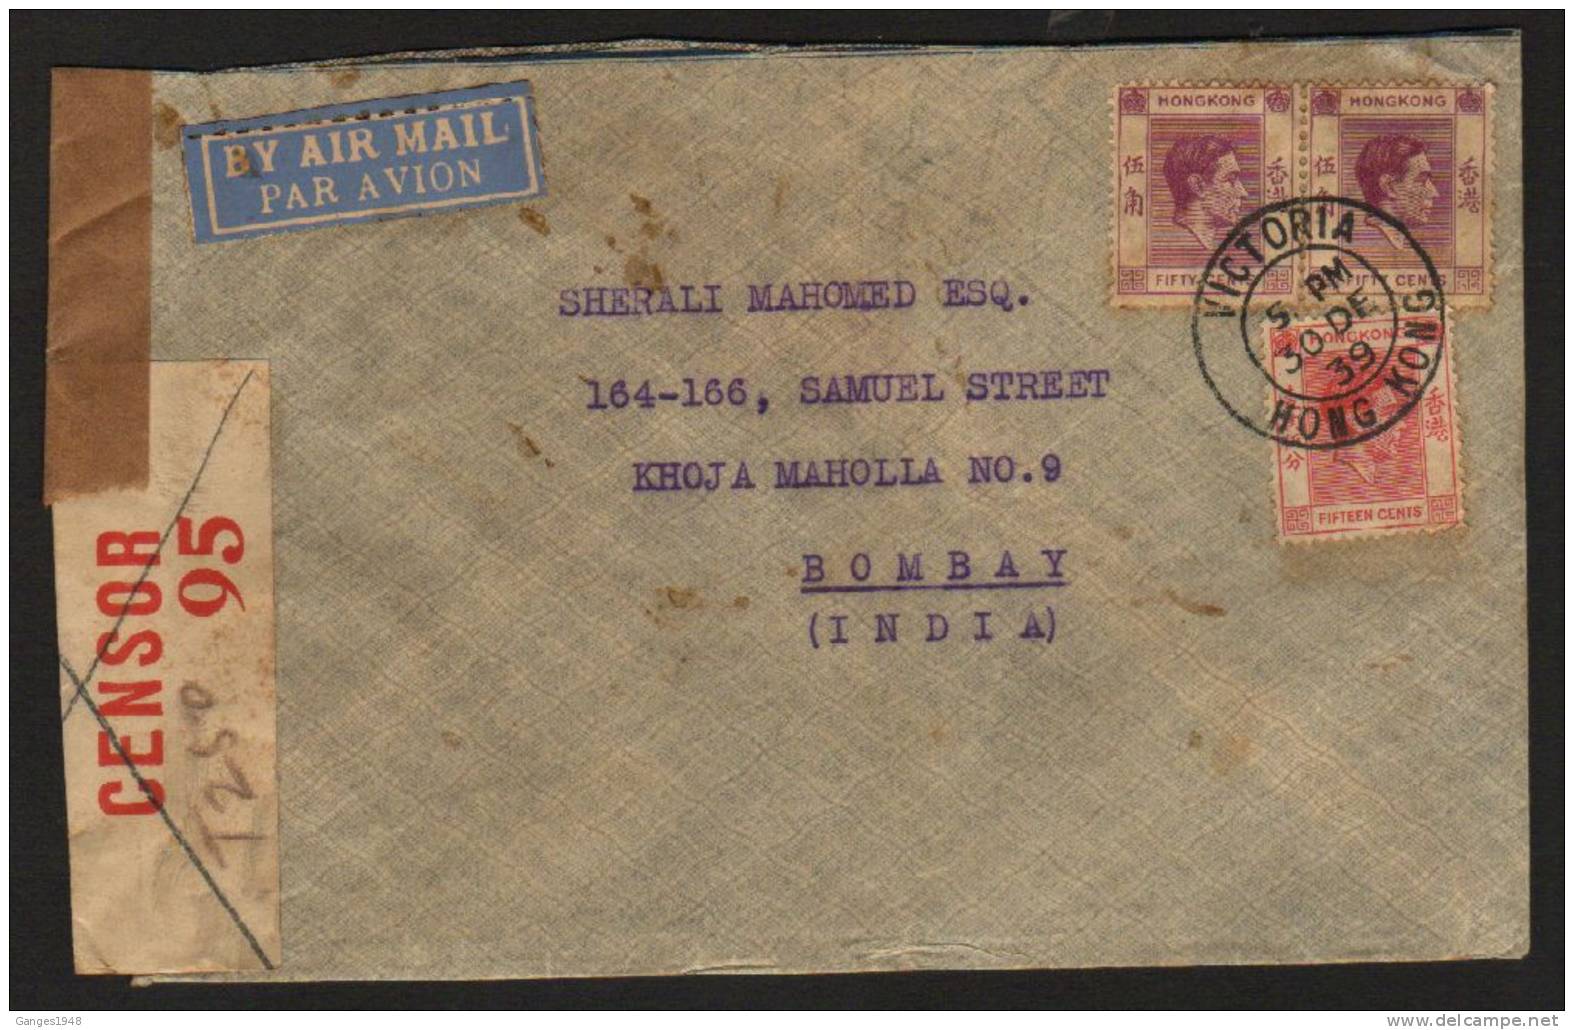 30 DE 39 HONG KONG KG VI  $1.15 Rate AIR MAIL  Cover To India ARRIVAL CENSOR # 25238 - Covers & Documents